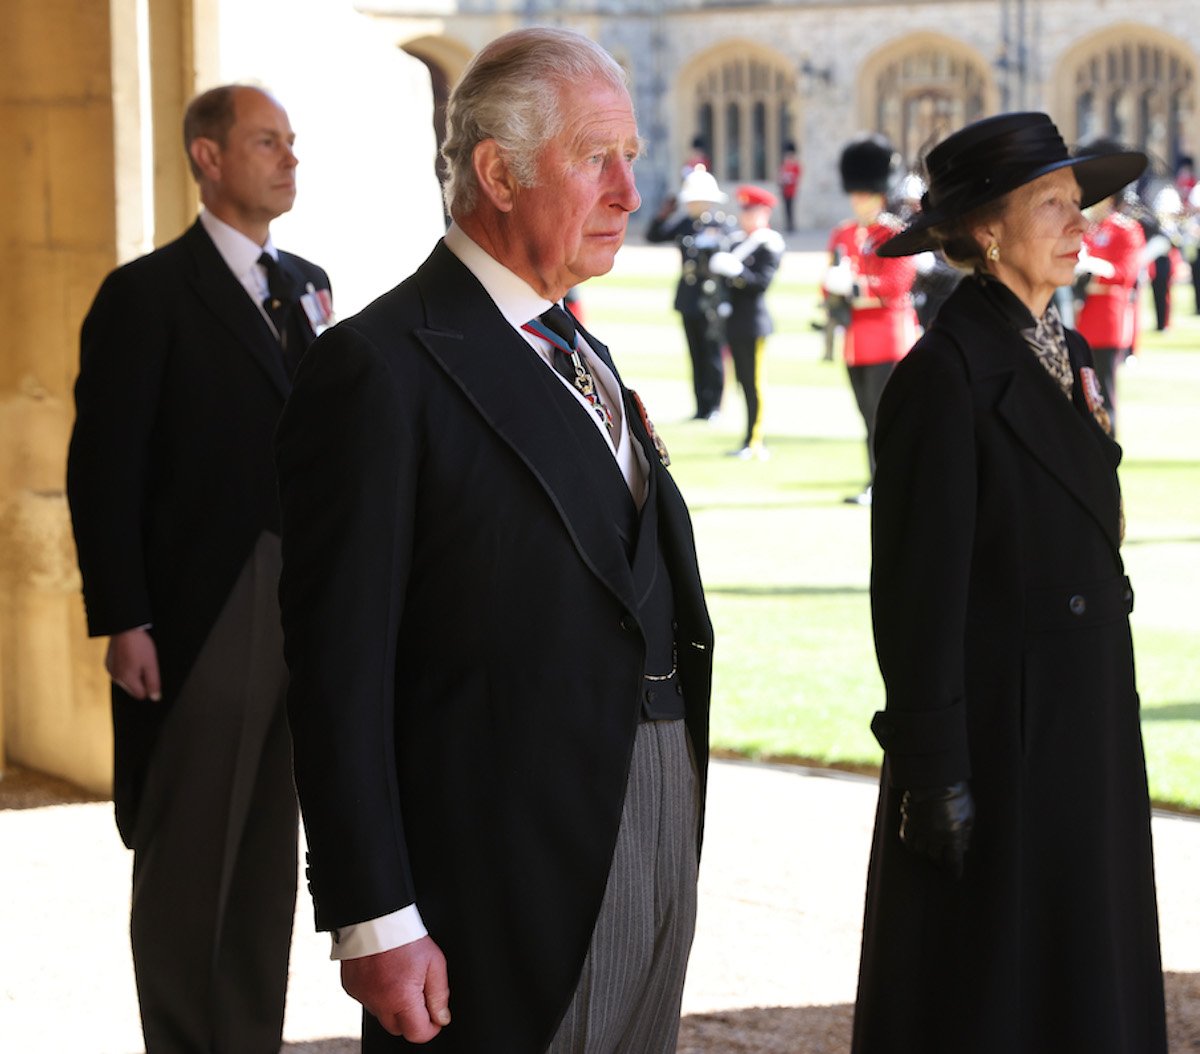 King Charles III, who shows he has 'total confidence' in Princess Anne and Prince Edward by requesting they becoming 'counsellors of state' according to a biographer, stand together wearing black